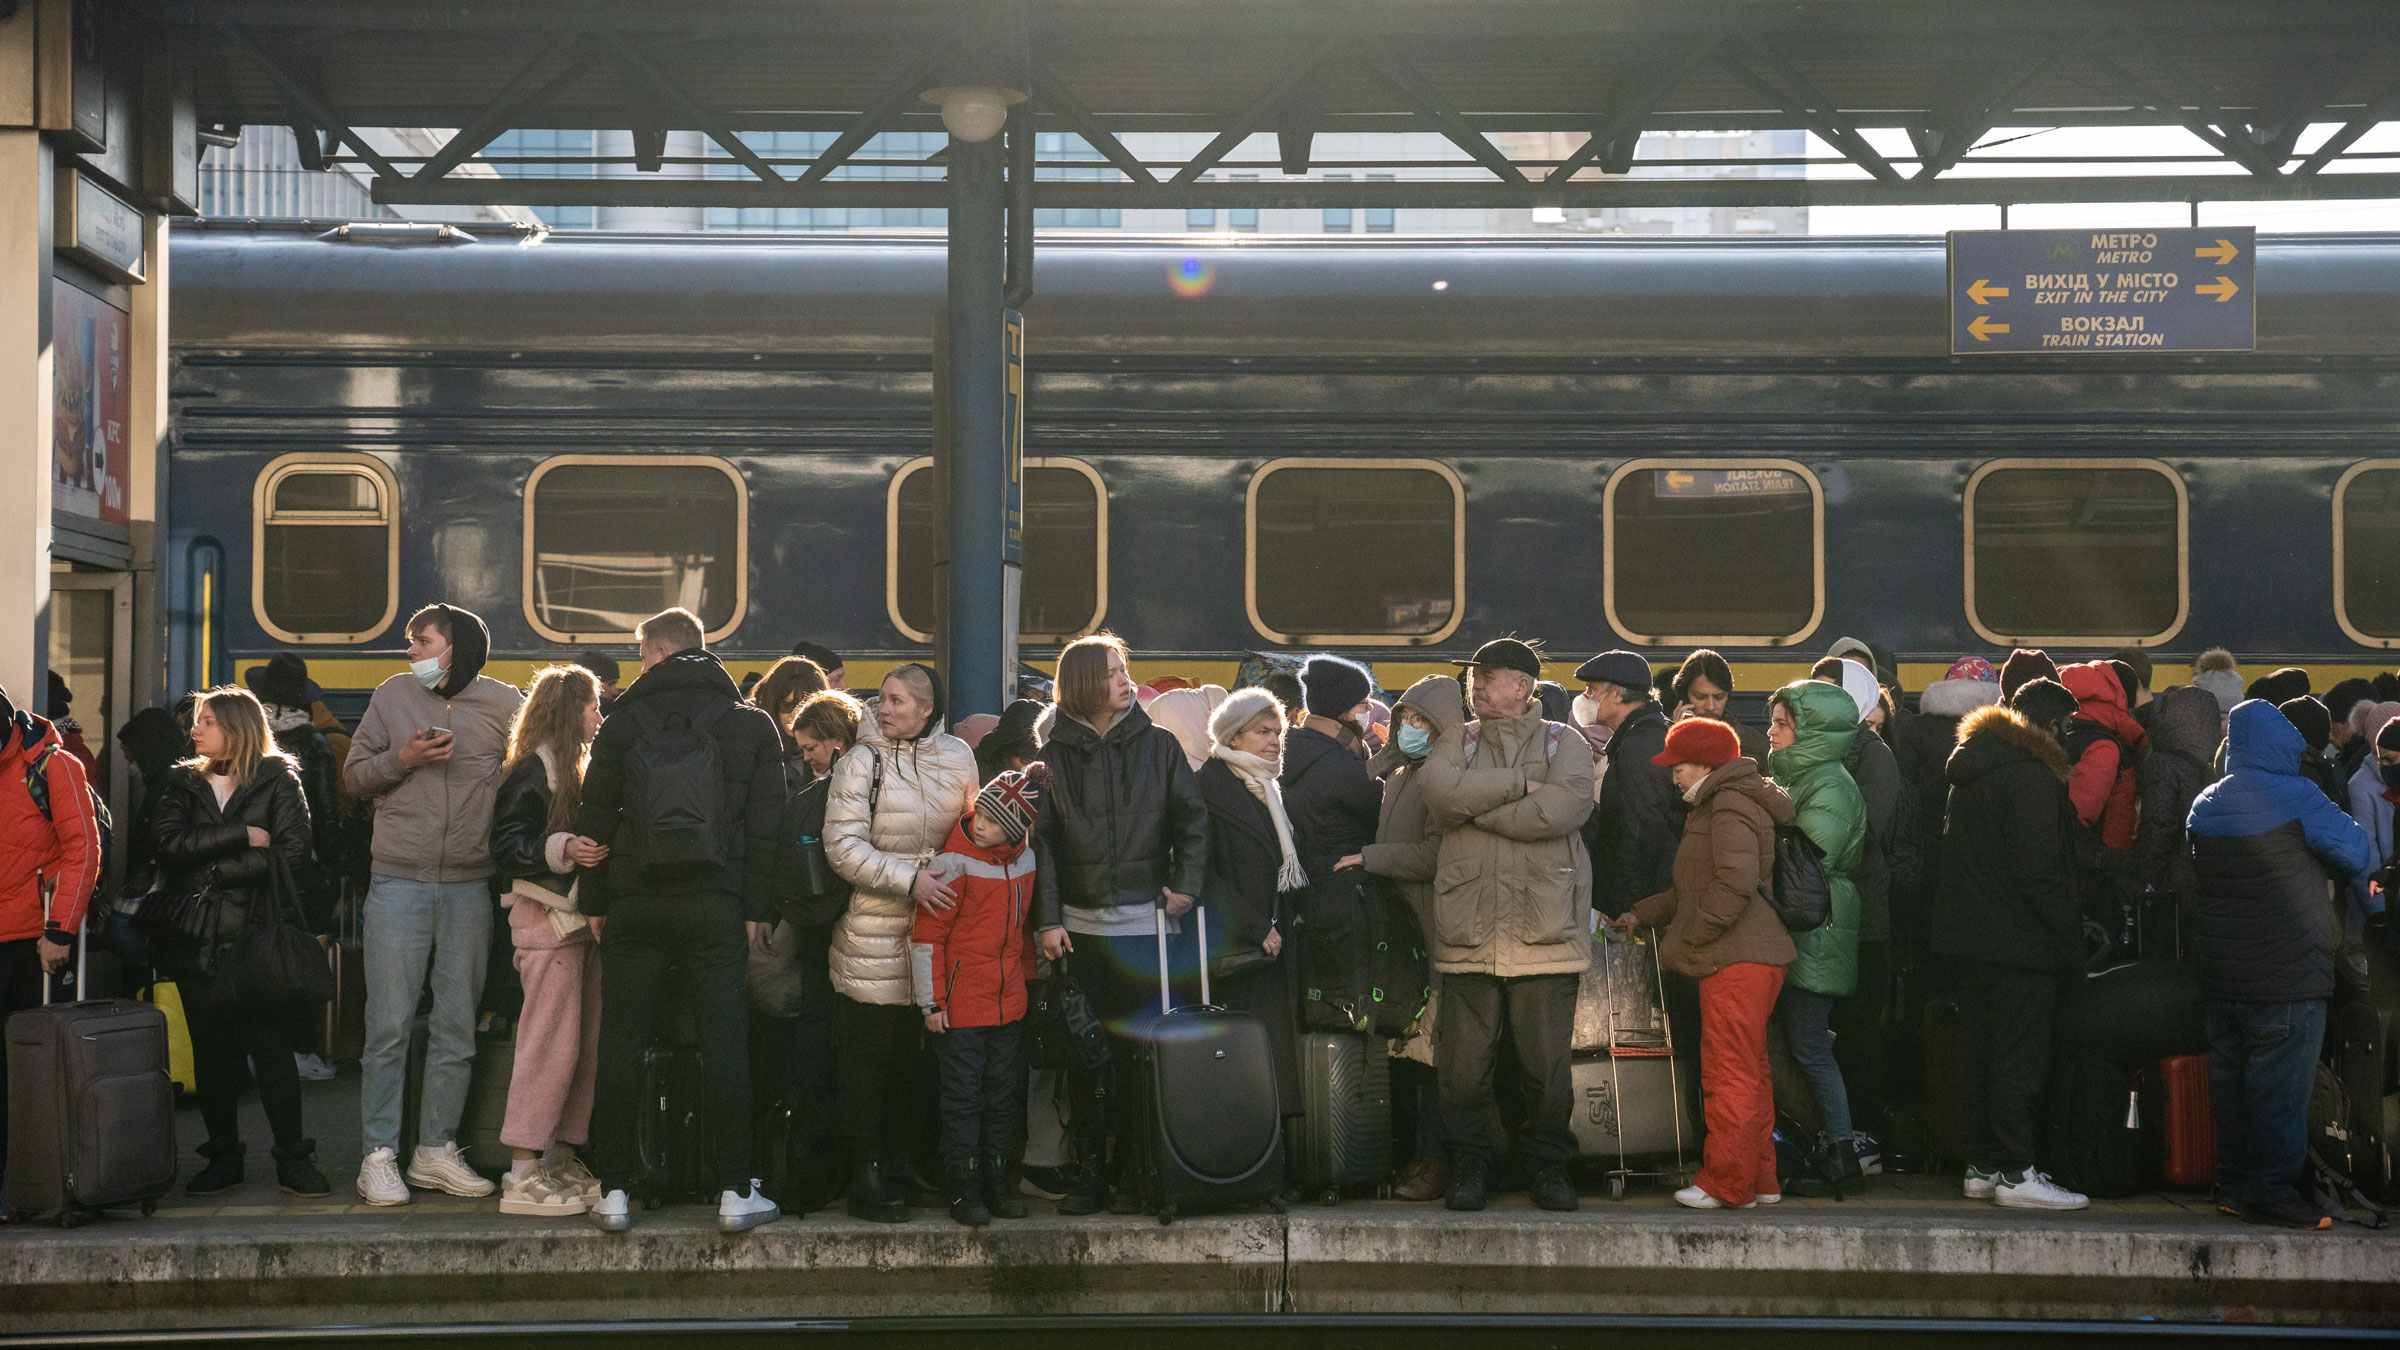 People board trains in Kyiv. More than 500,000 refugees have already left Ukraine, according to the United Nations.